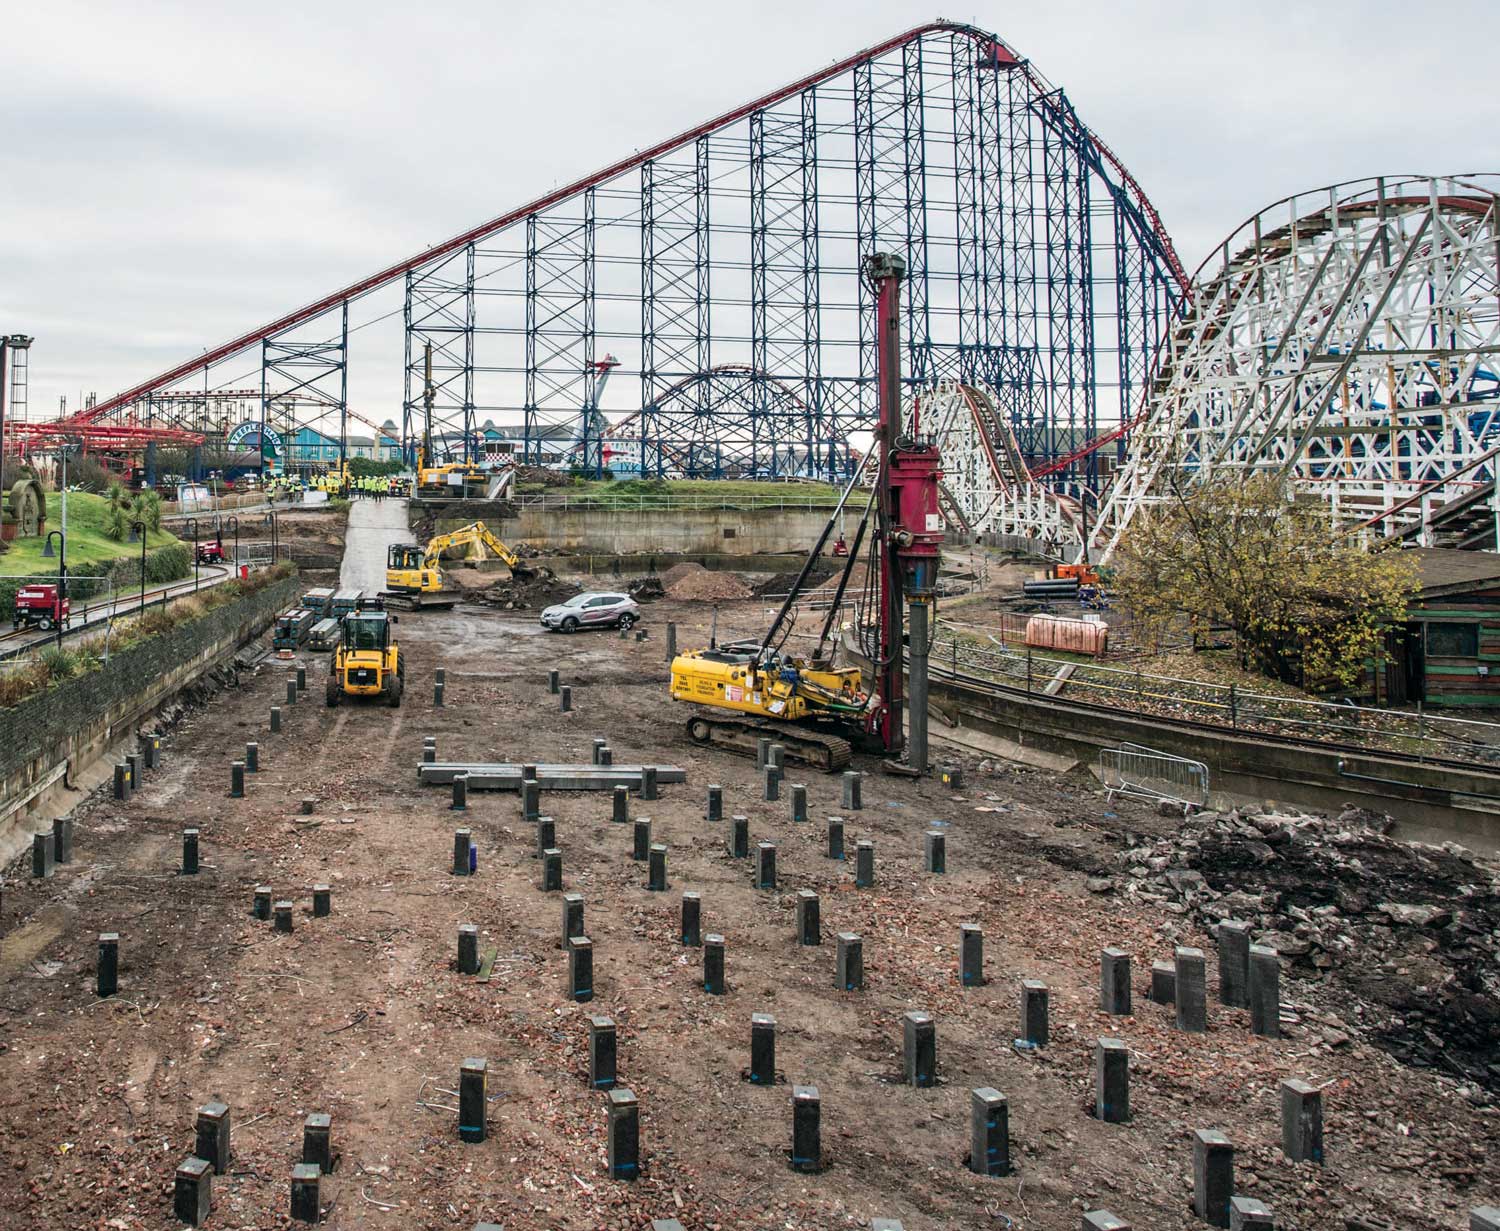 RB Piling Rig In front of a rollercoaster at Blackpool pleasure beach